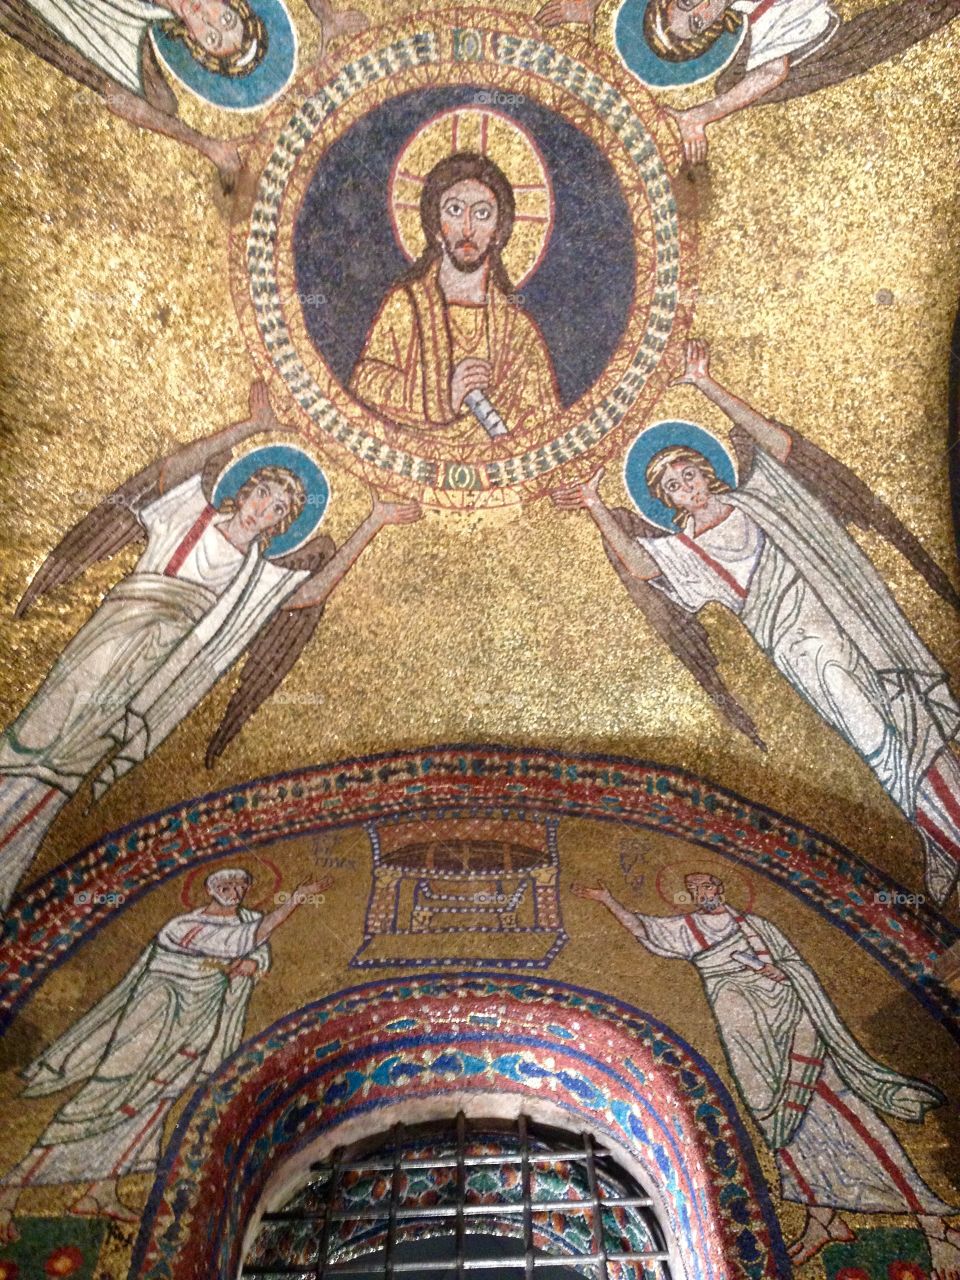 An early Christian mosaic in Rome showing Jesus Christ and four angels. Basilica of Santa Prassede, Rome